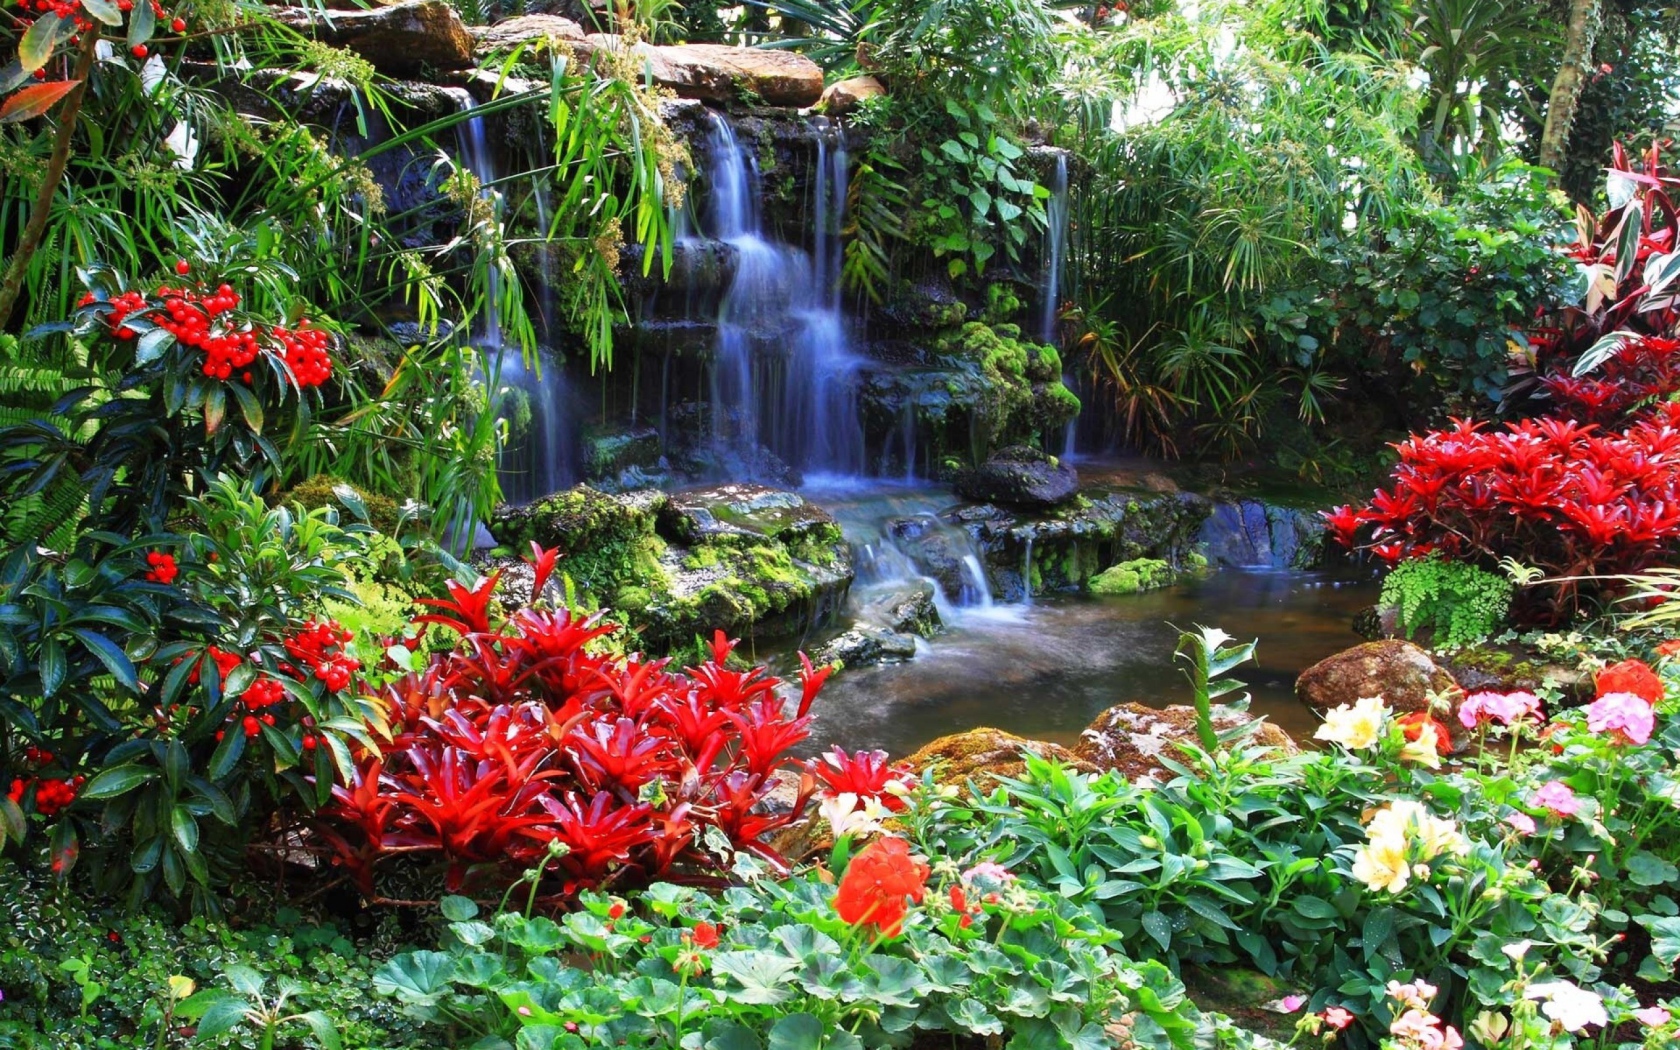 Red flowers at the waterfall